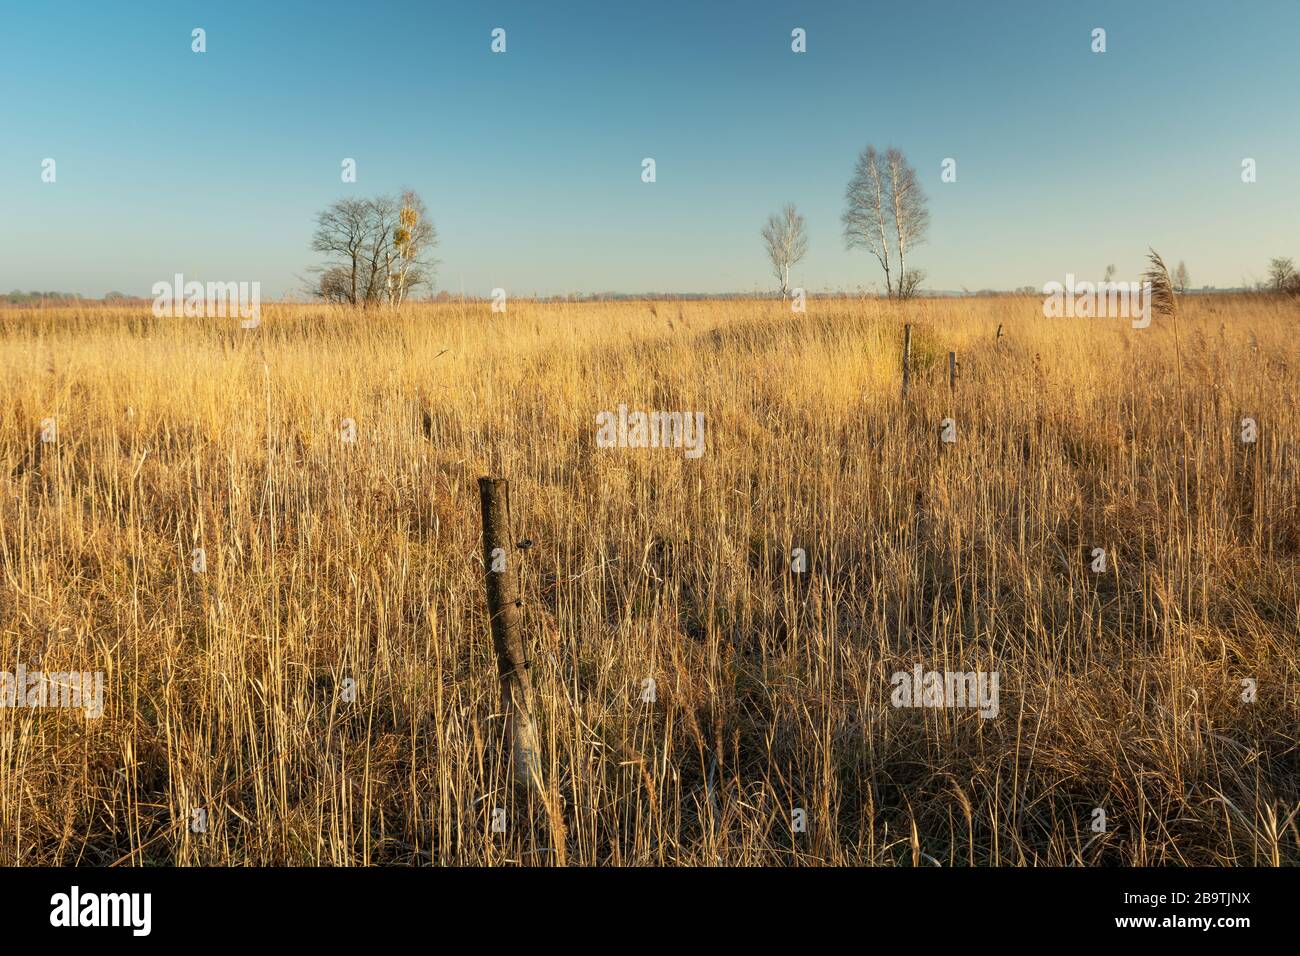 Dry grasses on wild yellow meadow, view on a cloudless day Stock Photo